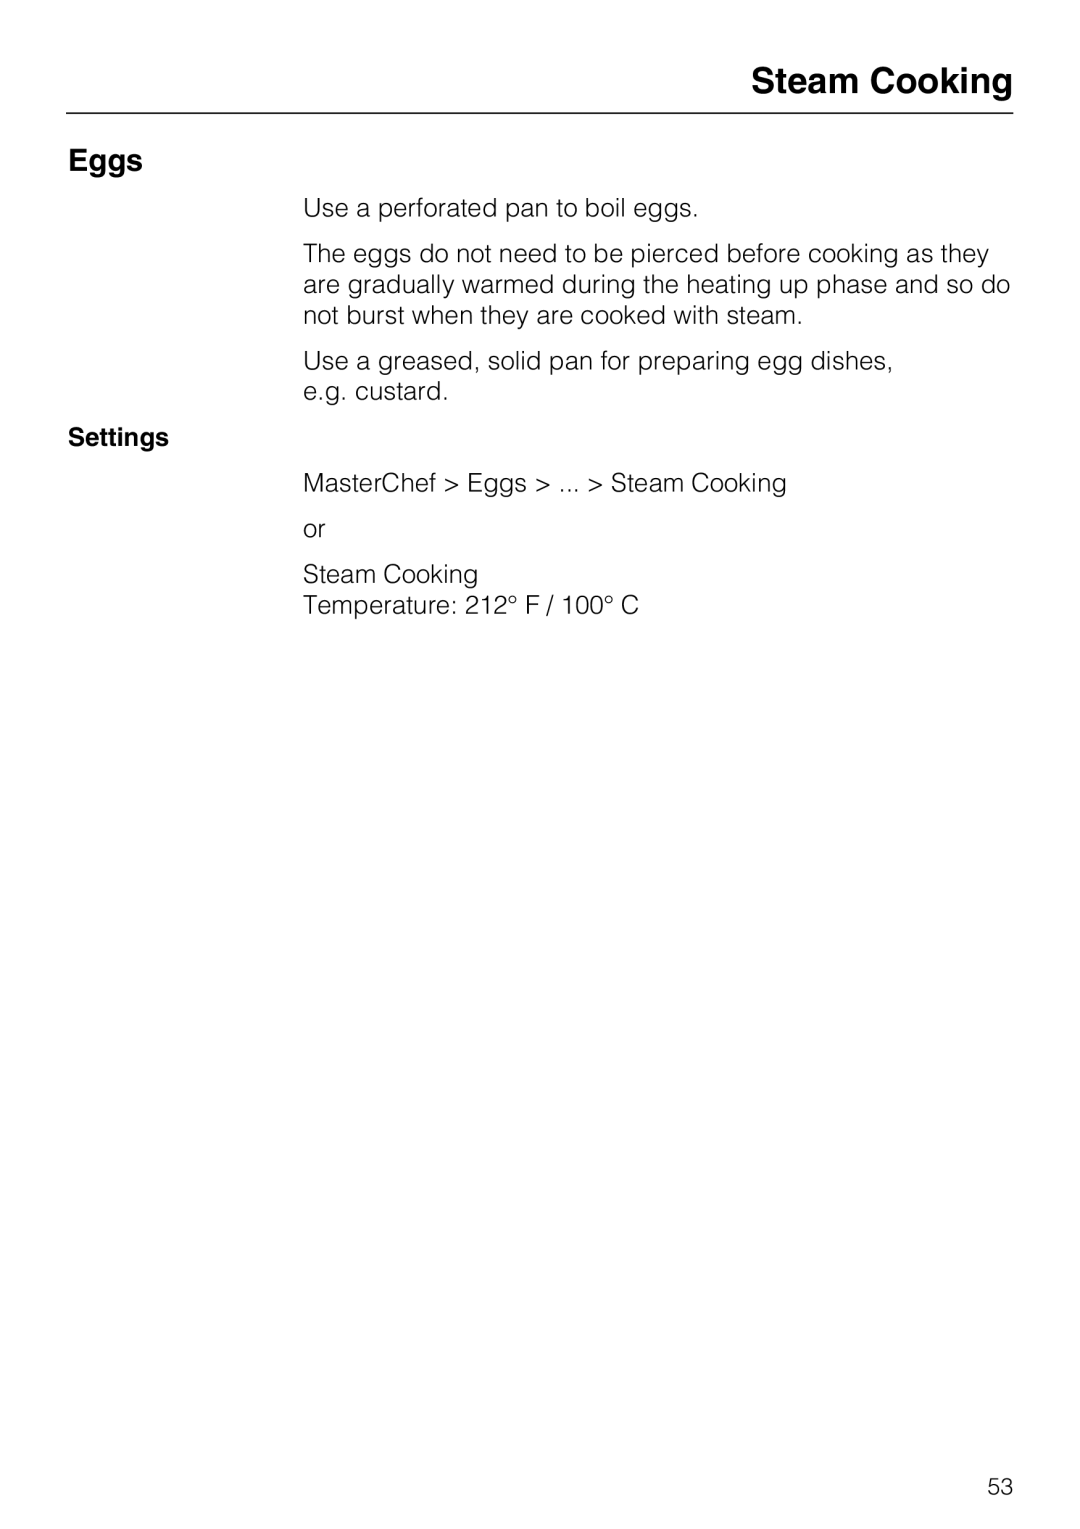 Miele 09 800 830 installation instructions Use a perforated pan to boil eggs, MasterChef Eggs ... Steam Cooking or 